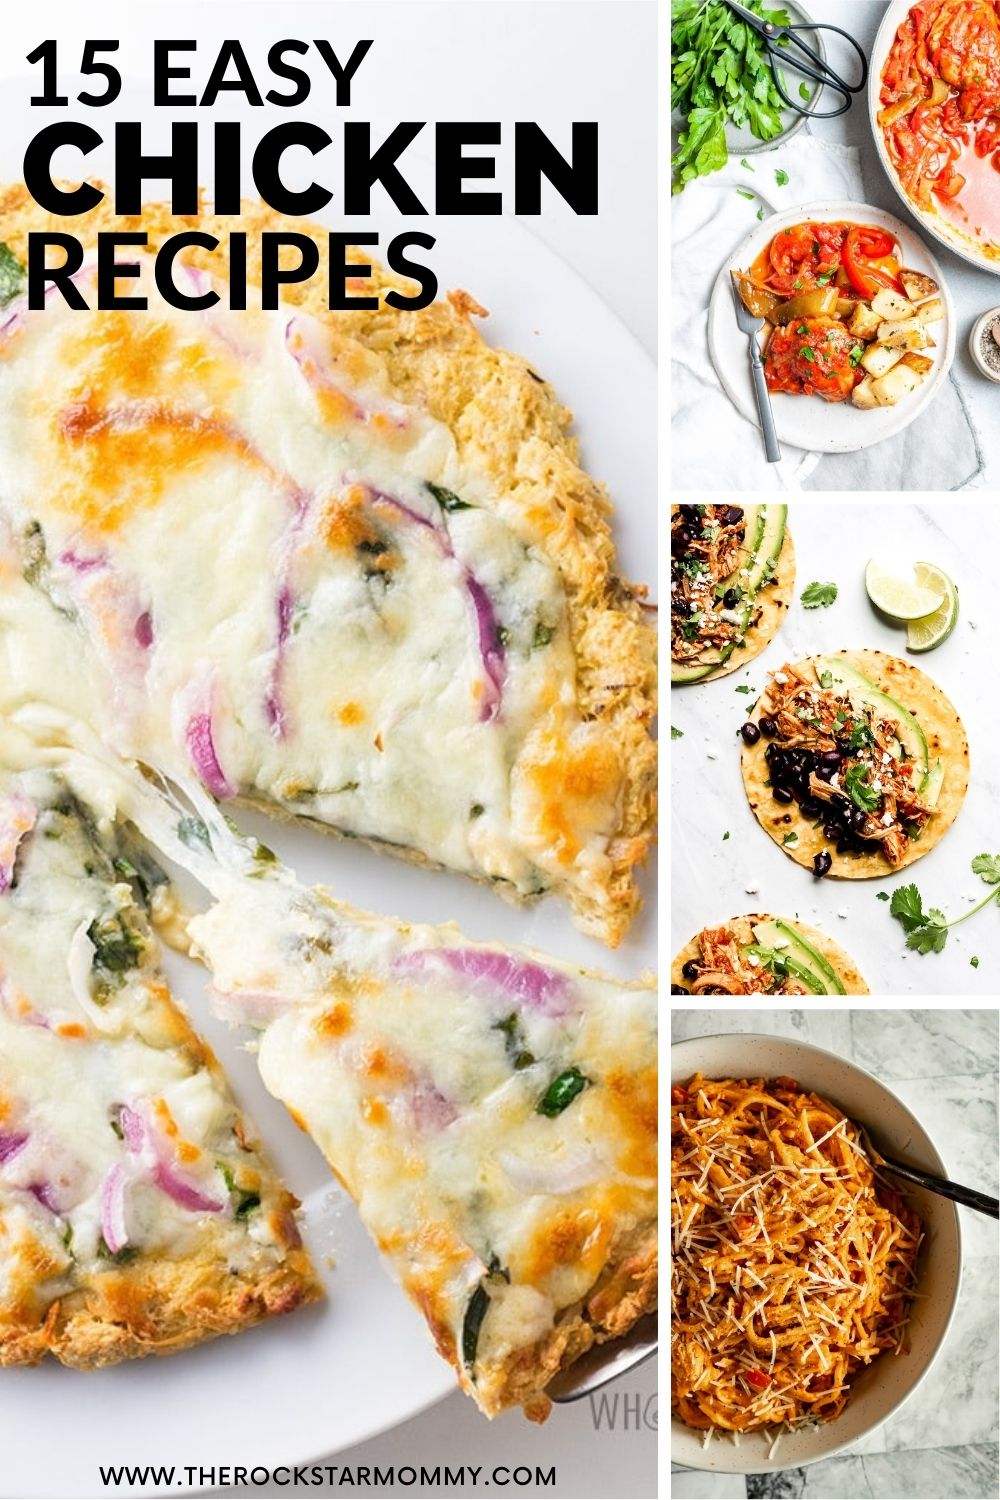 Collage of 15 Easy Chicken Recipes